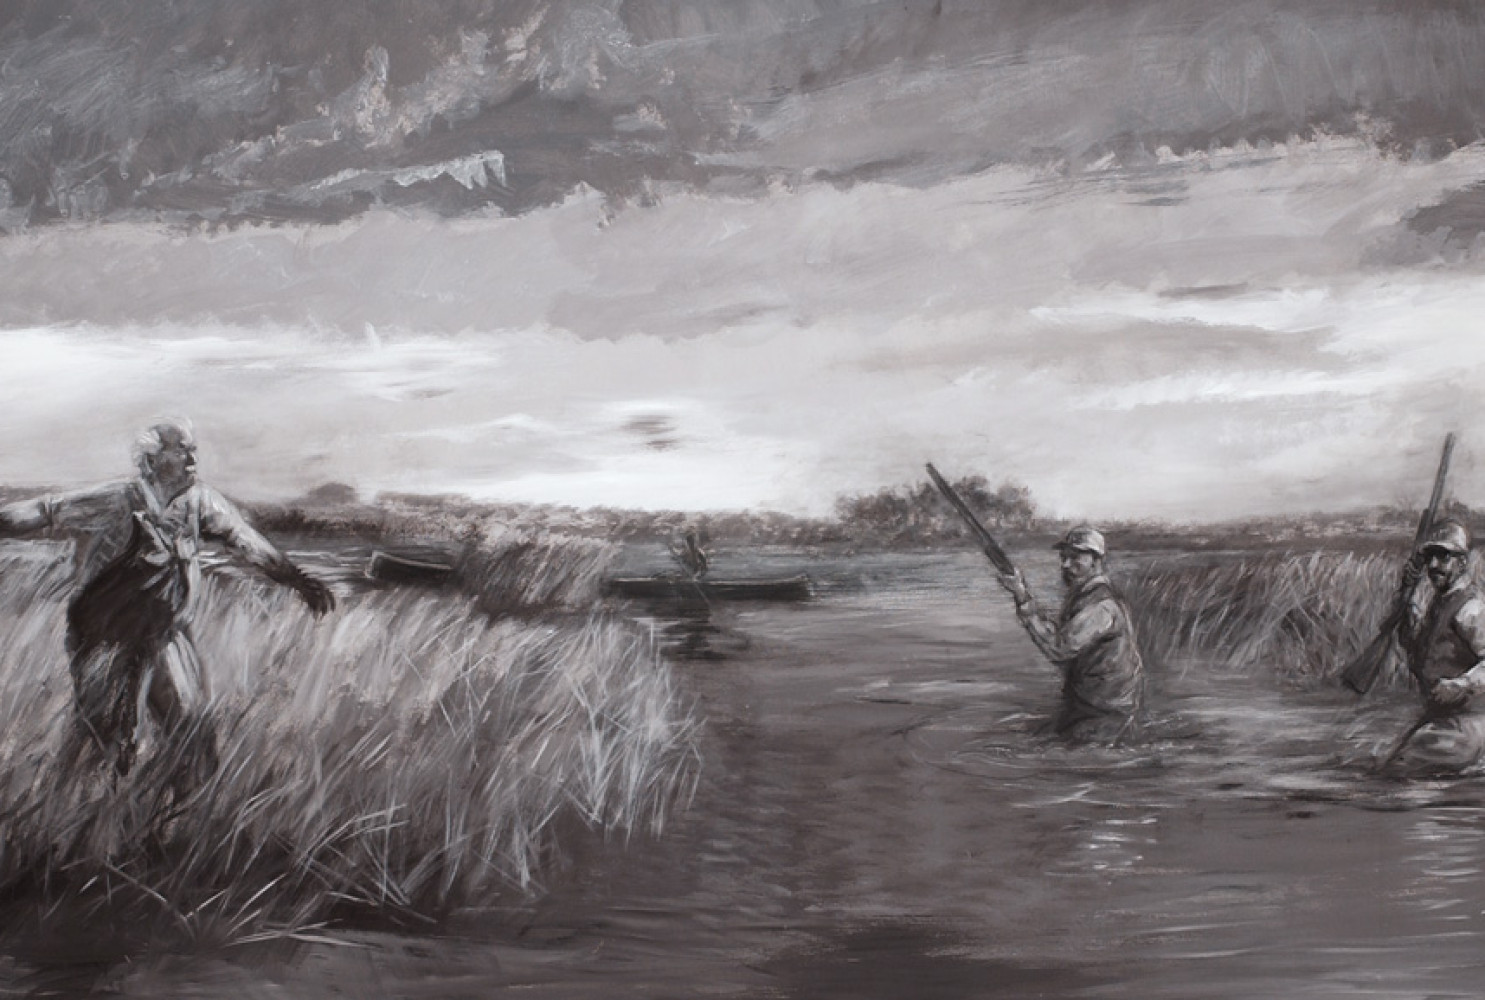 Sunday in the Marsh (detail), 1987, By Manning Williams (American, 1939 - 2012); Acrylic and charcoal on paper
51 x 75 inches; Gibbes Museum of Art
2005.001.0003